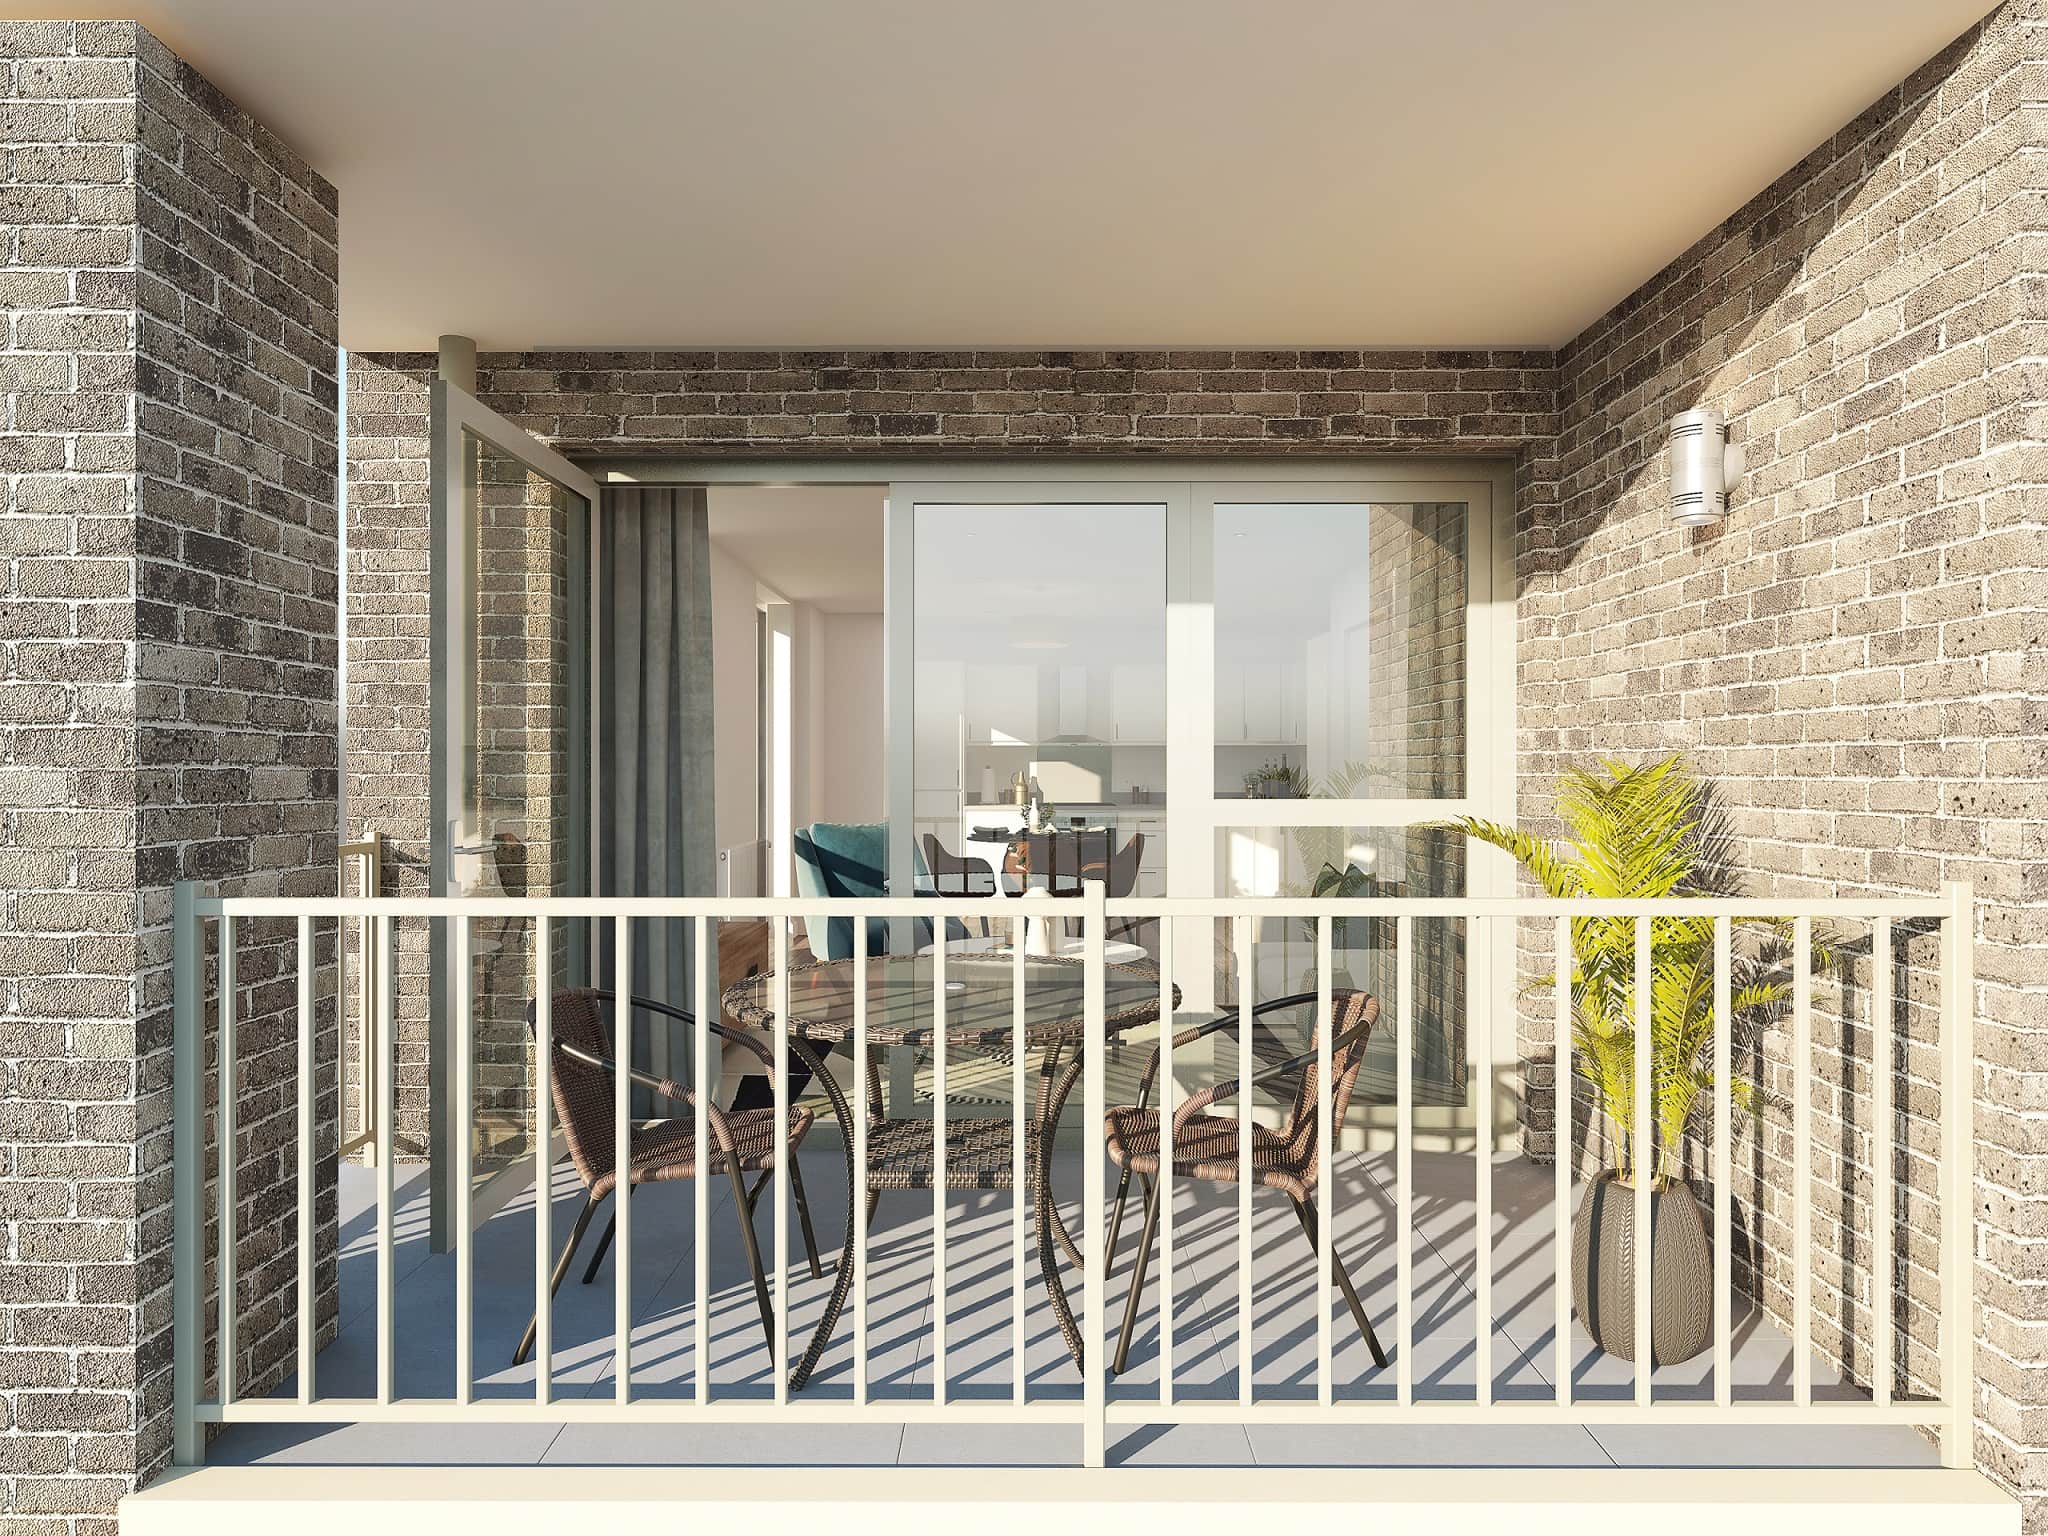 Balcony photography of Catalyst's Newman Place development - Shared Ownership and Help to Buy homes available on Share to Buy